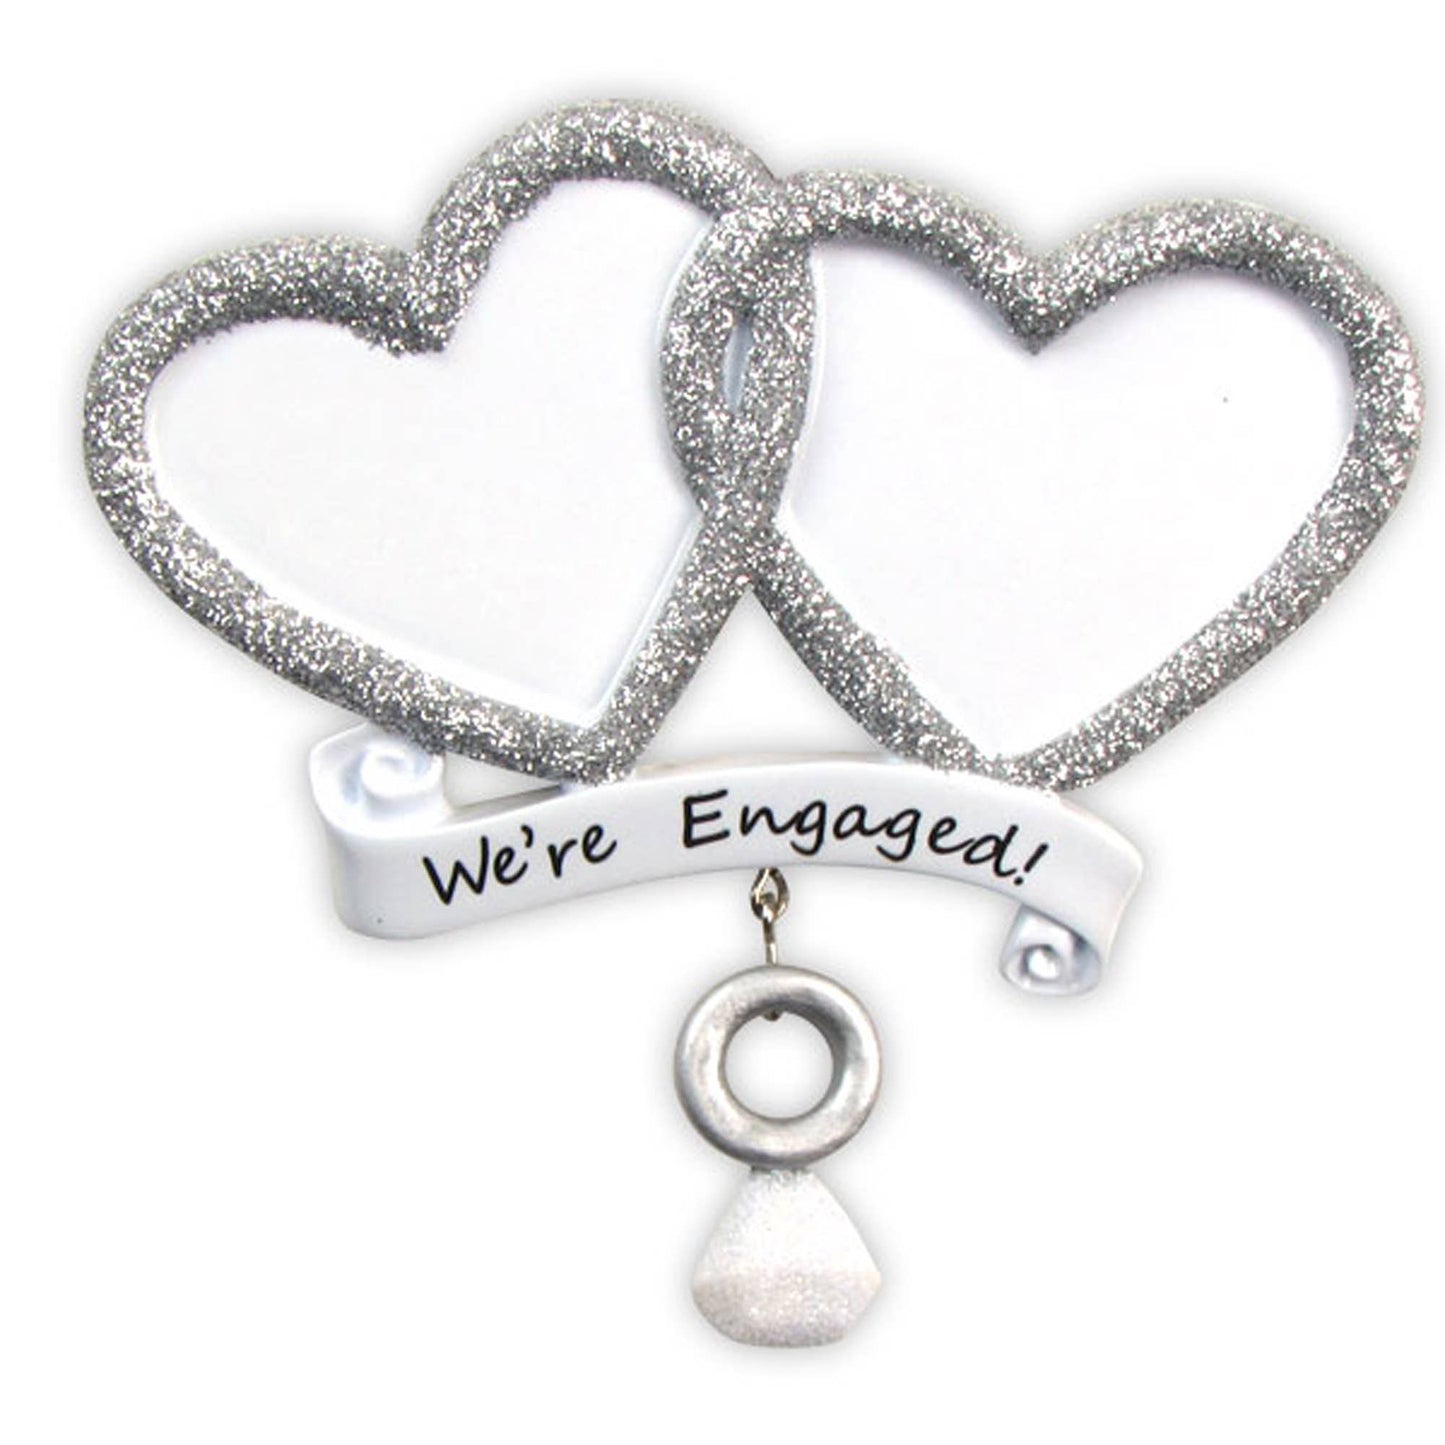 We're Engaged! Personalized Christmas Ornament